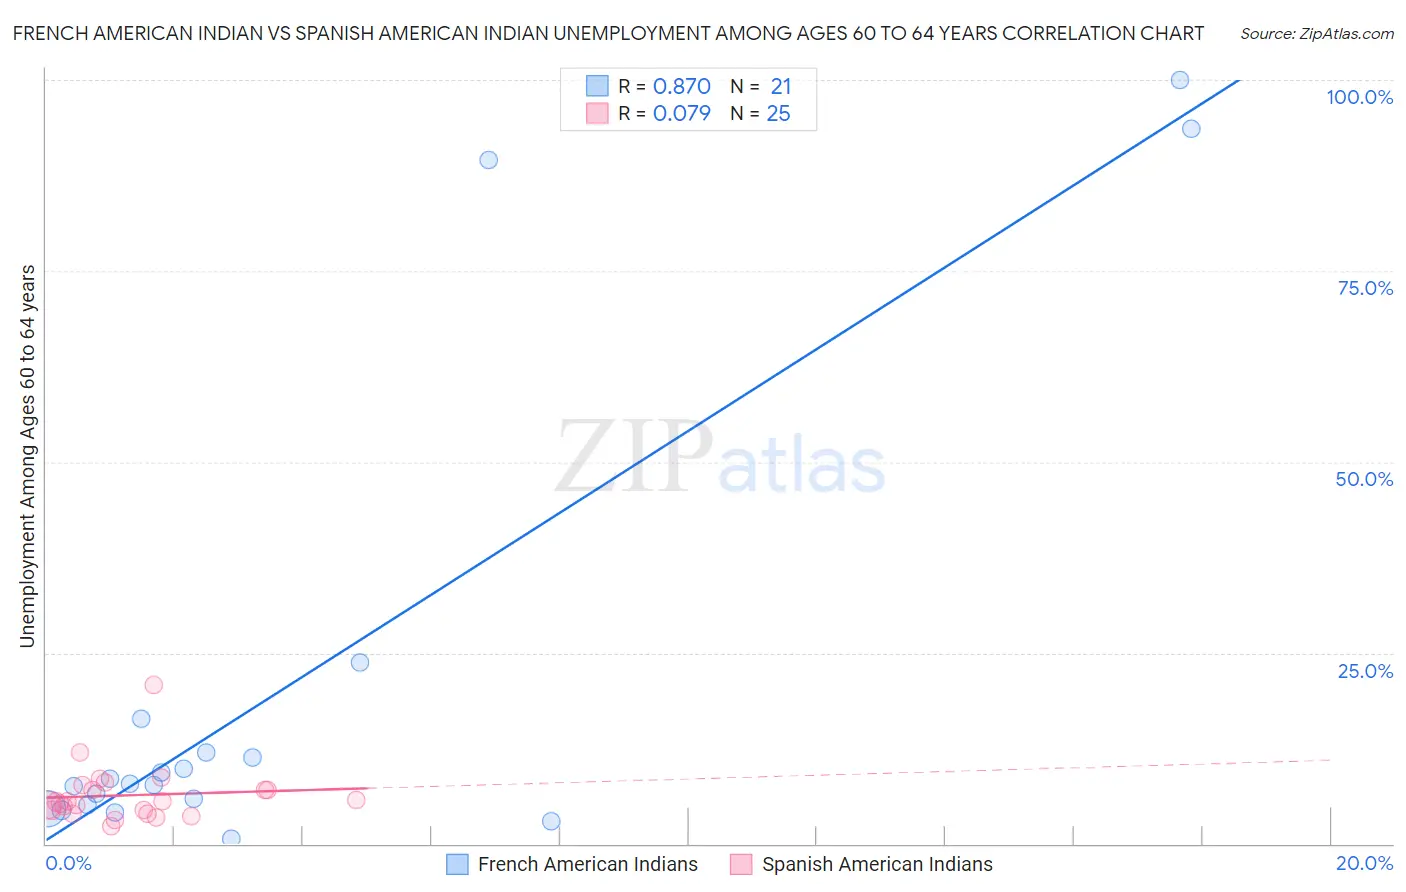 French American Indian vs Spanish American Indian Unemployment Among Ages 60 to 64 years